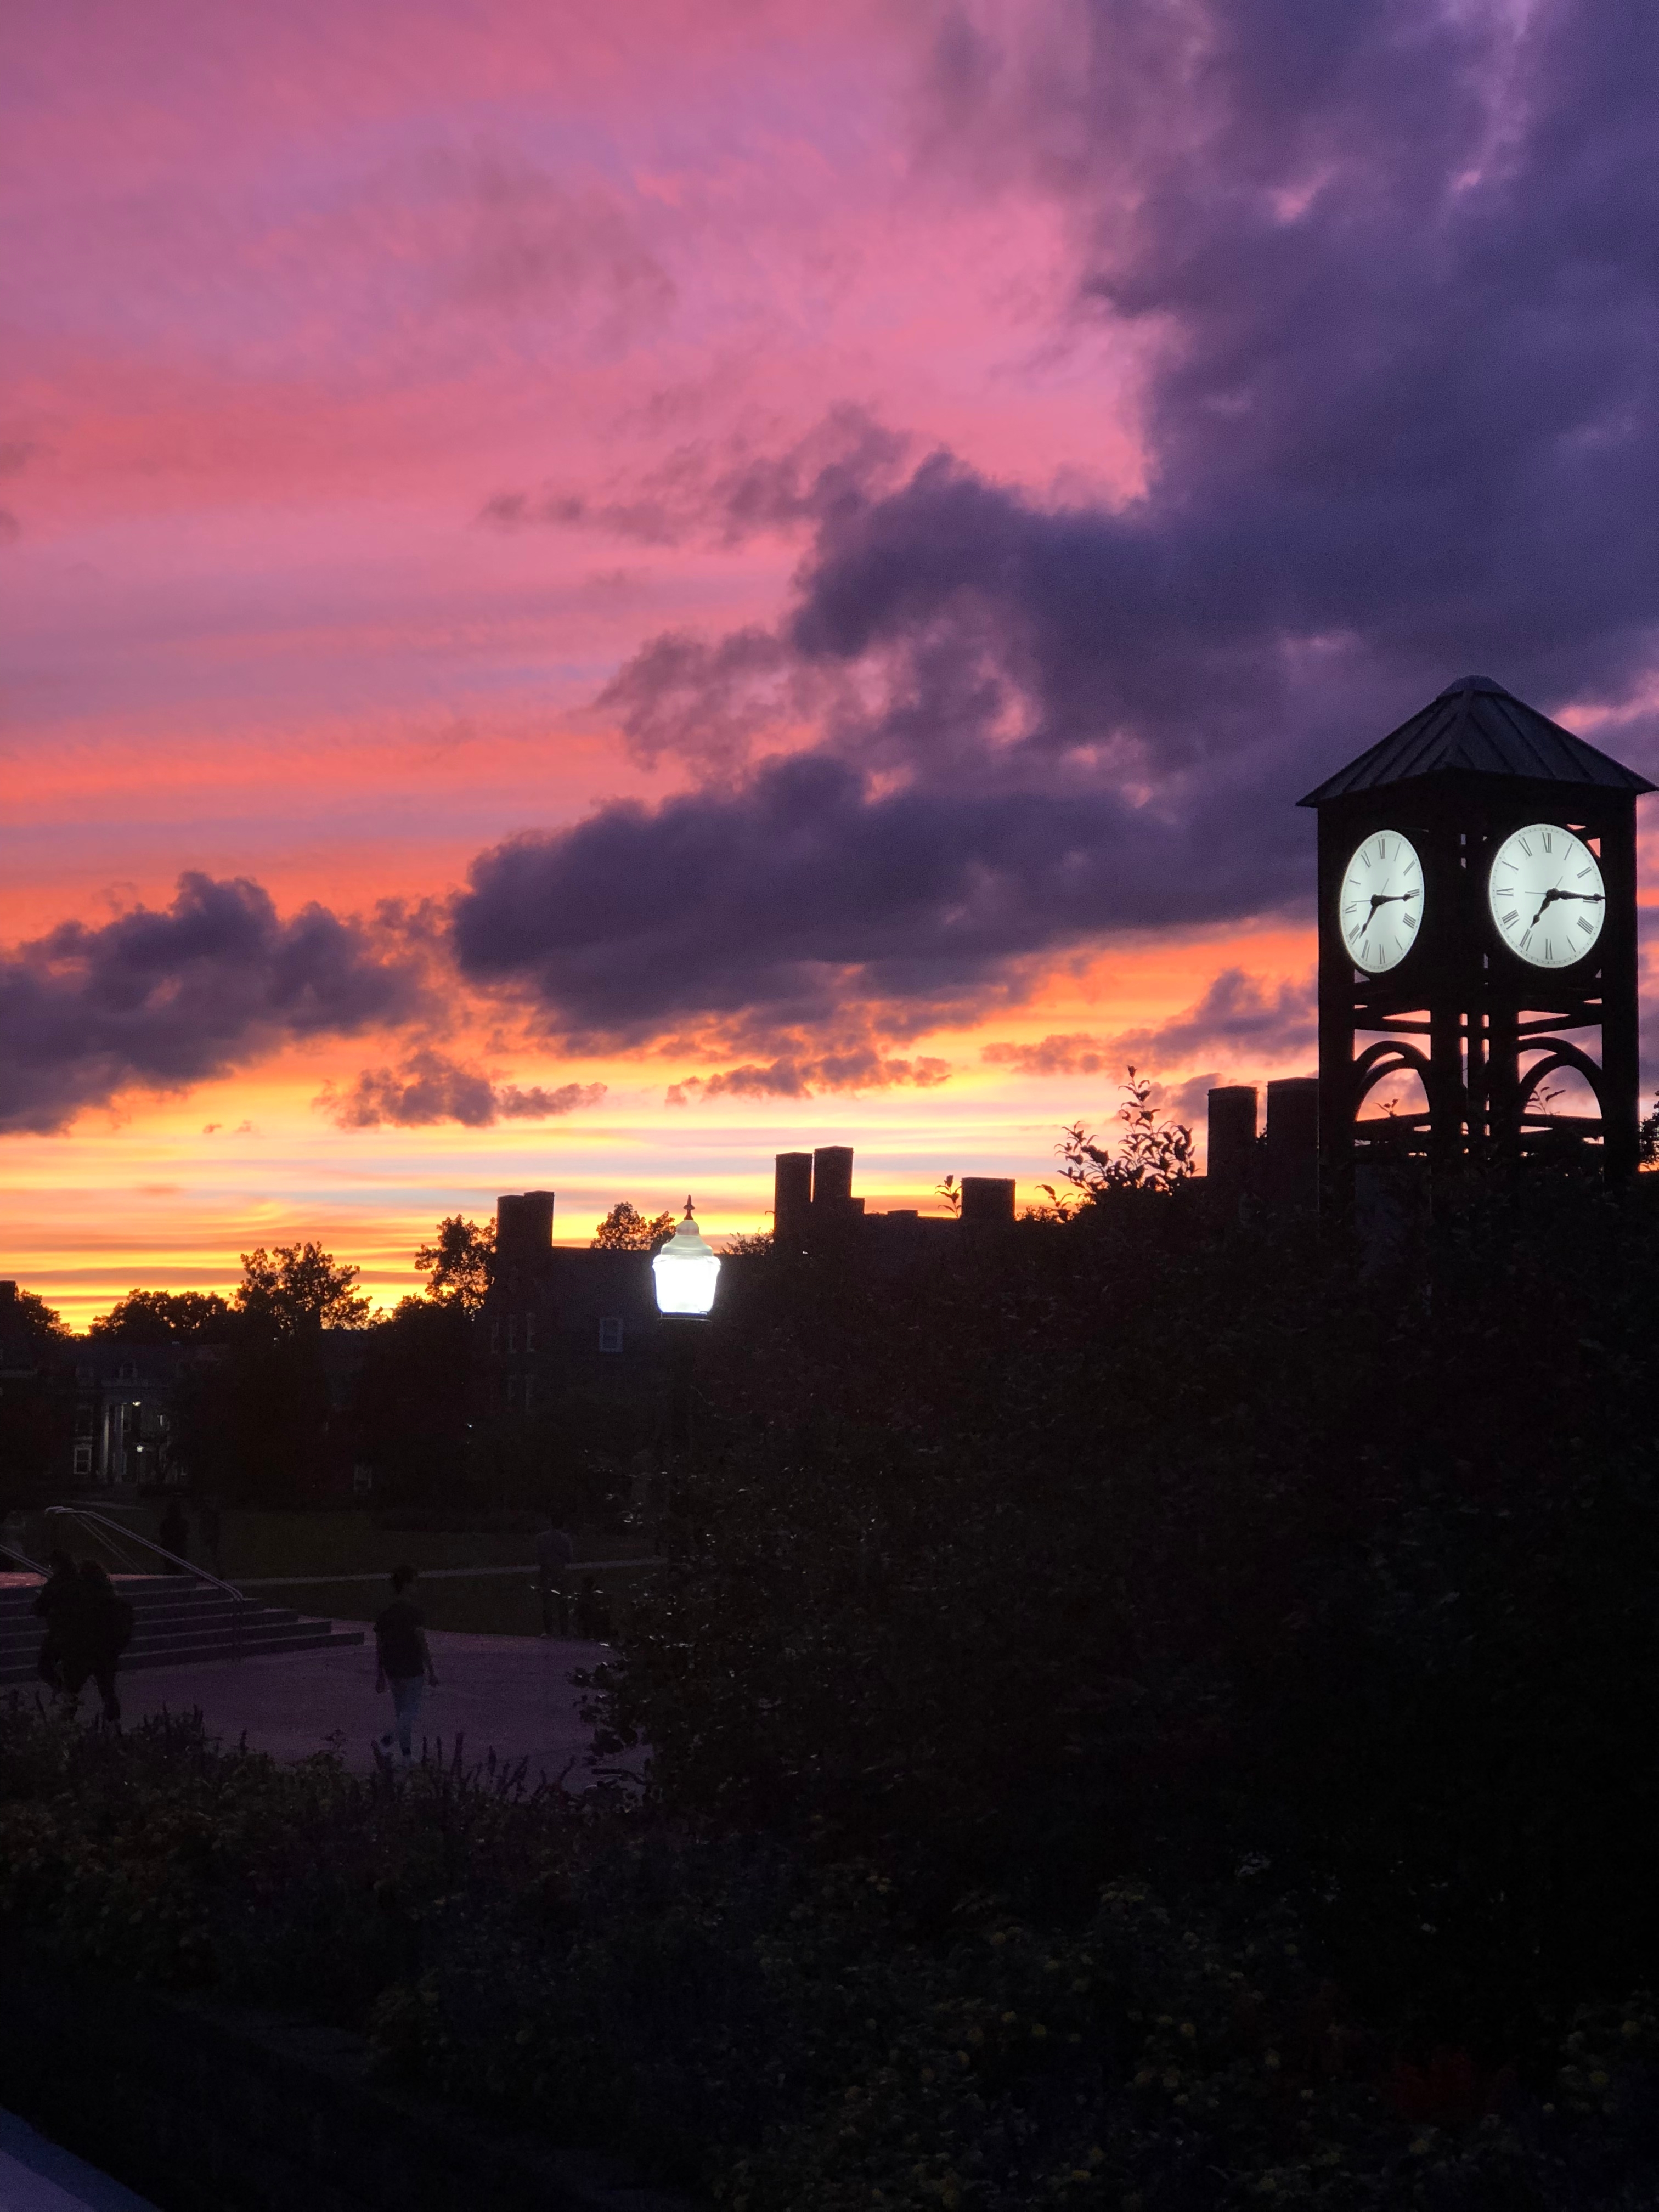 university of rochester clock tower and buildings silhouetted against sunset